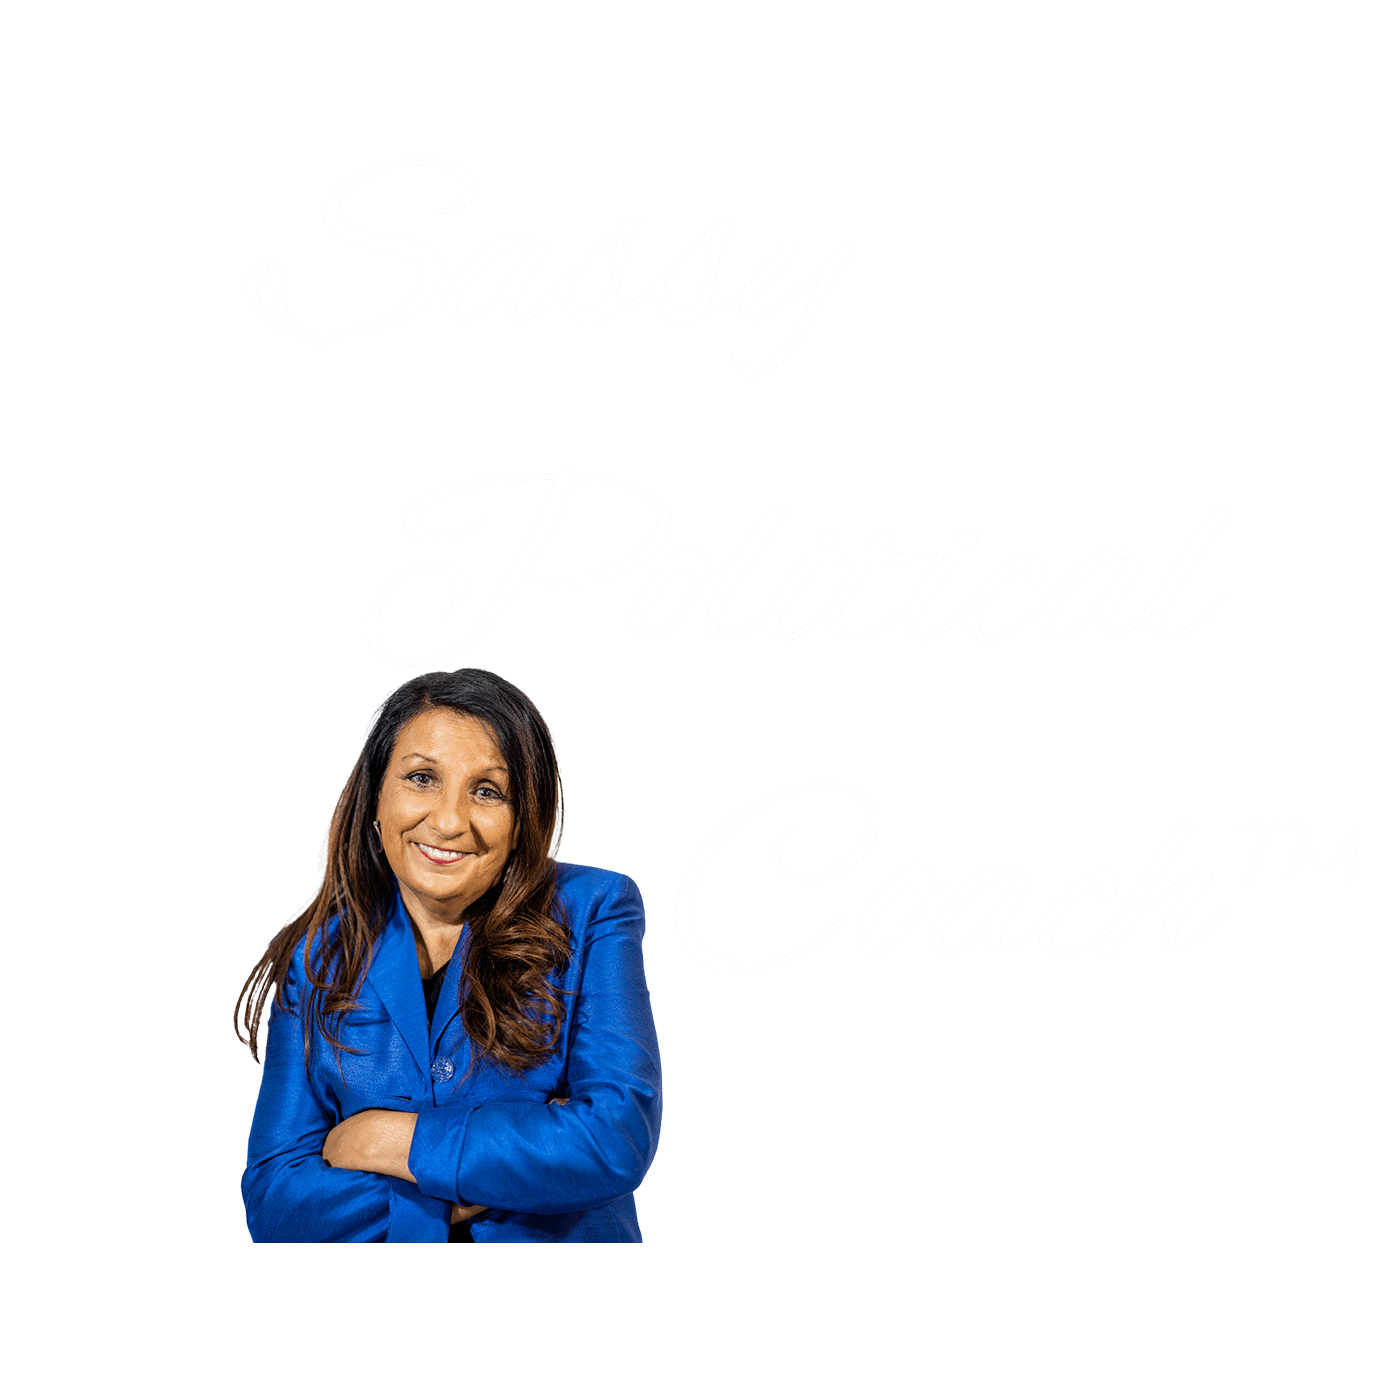 Sassy Political Coach with Ana Maria and includes the Trade Mark logo